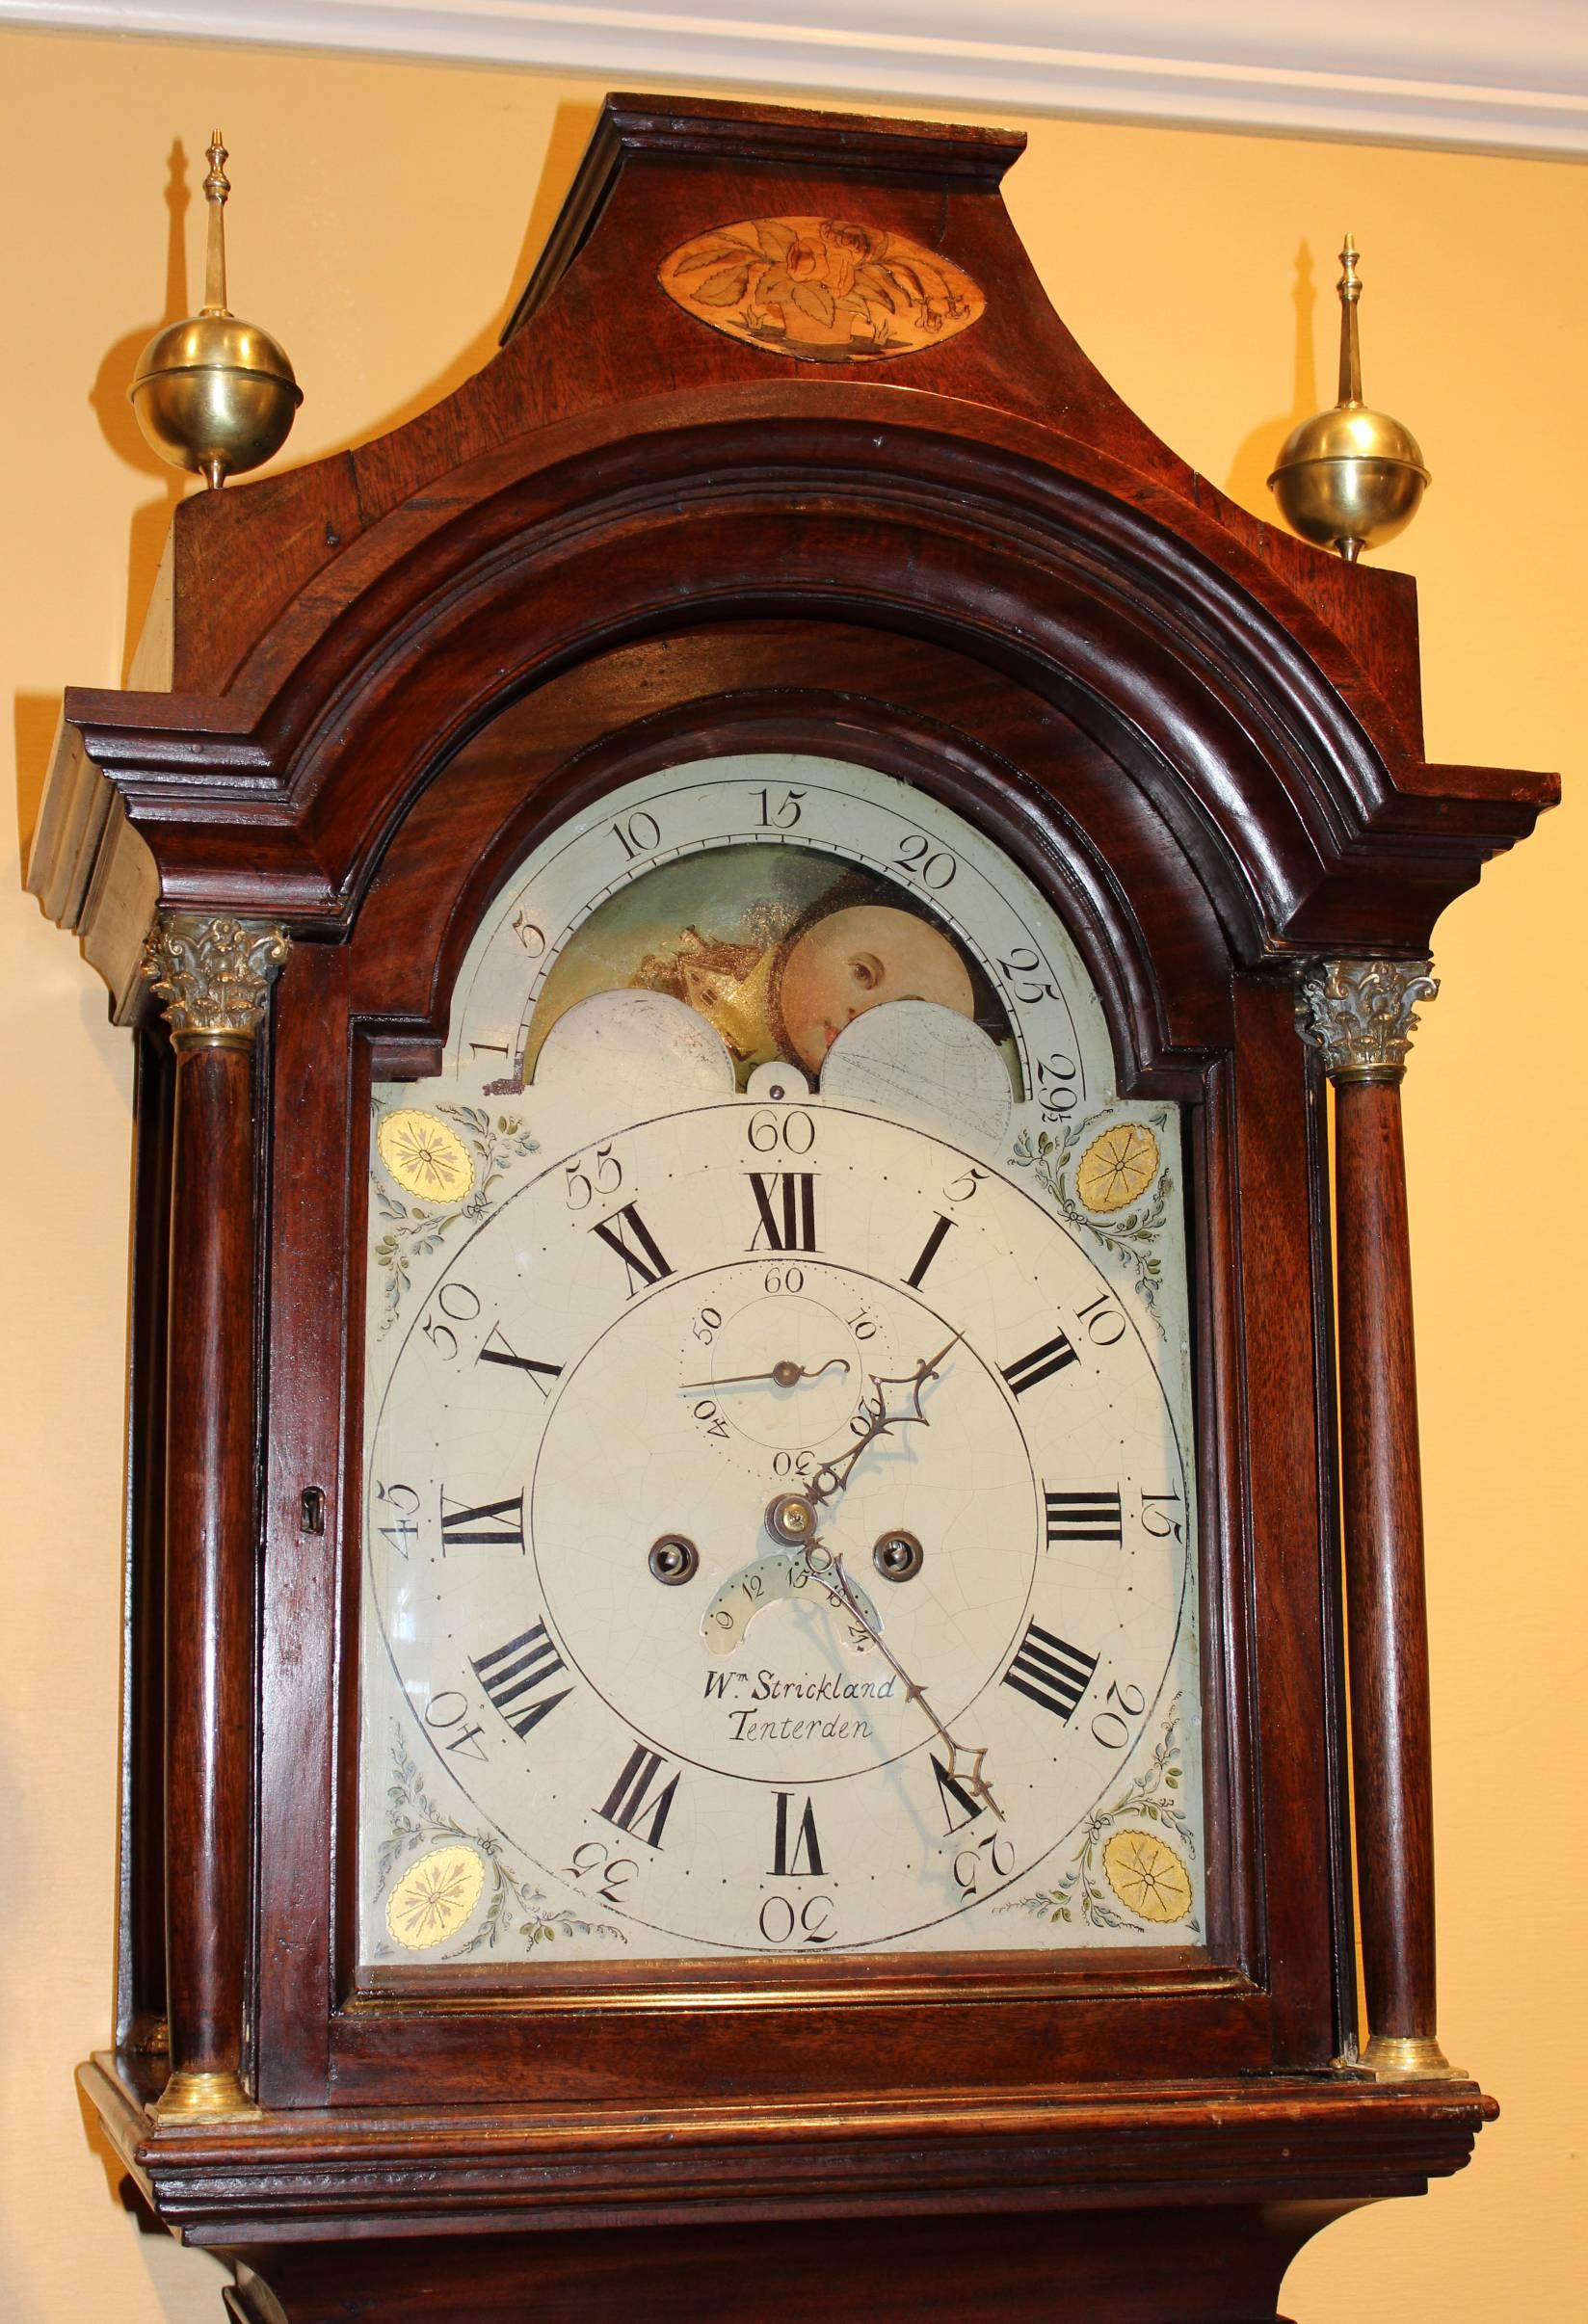 A fine English mahogany tall case clock with inlaid mahogany crest, brass ball and spire finials. Painted arched metal dial with nicely executed moon phase, Roman and Arabic numerals, seconds and date aperture, spandrels with wreaths and gilded